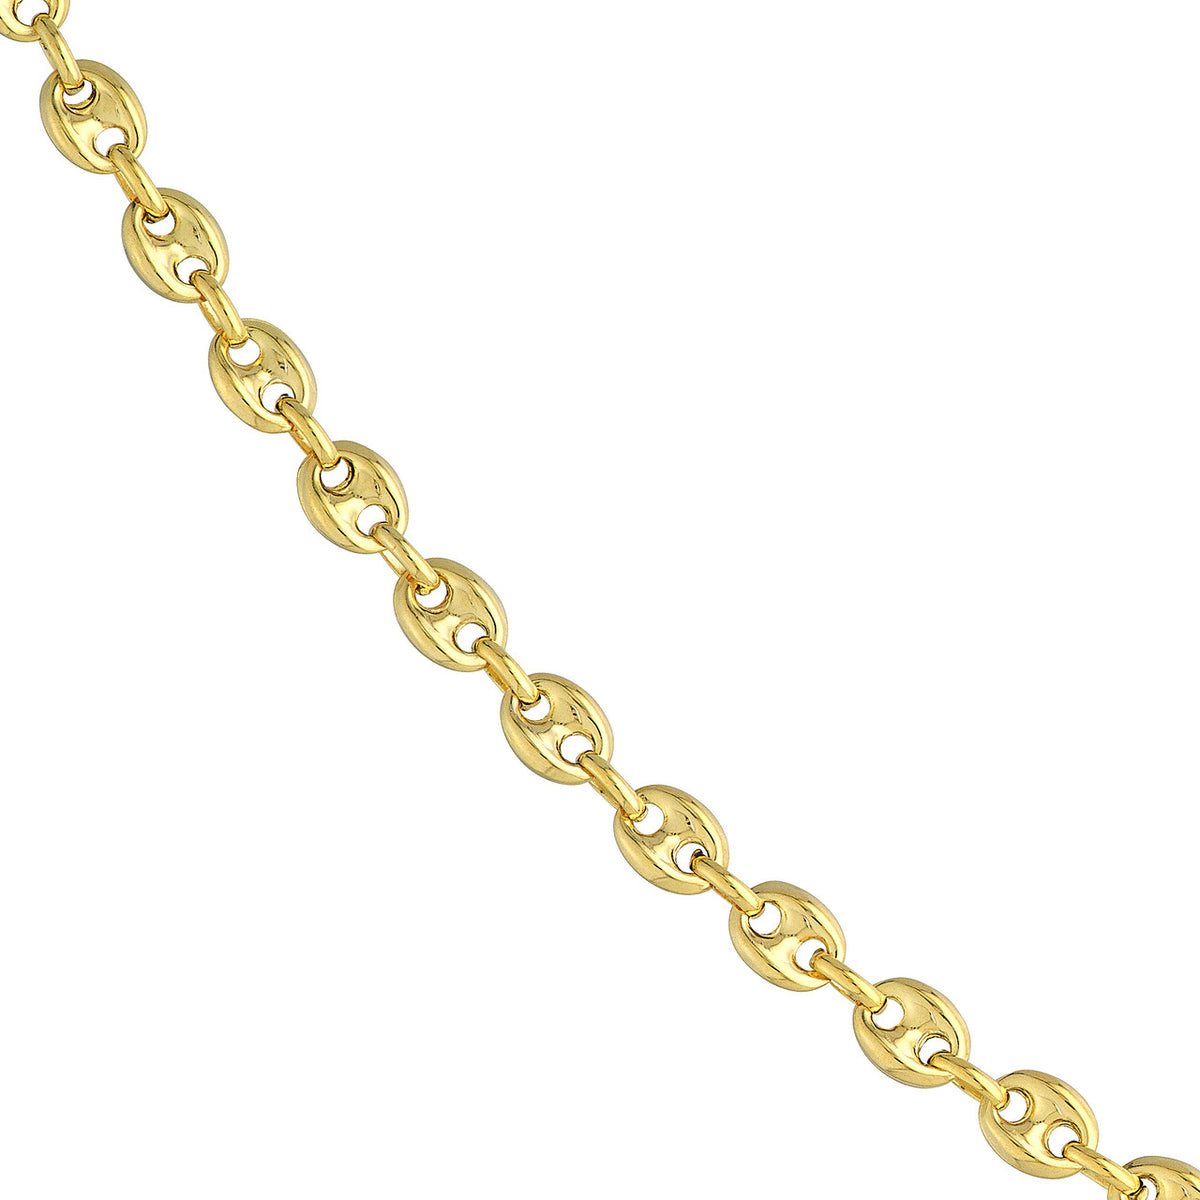 Solid 14K Yellow Gold 4.5mm Puff Mariner Chain Necklace with Lobster Lock